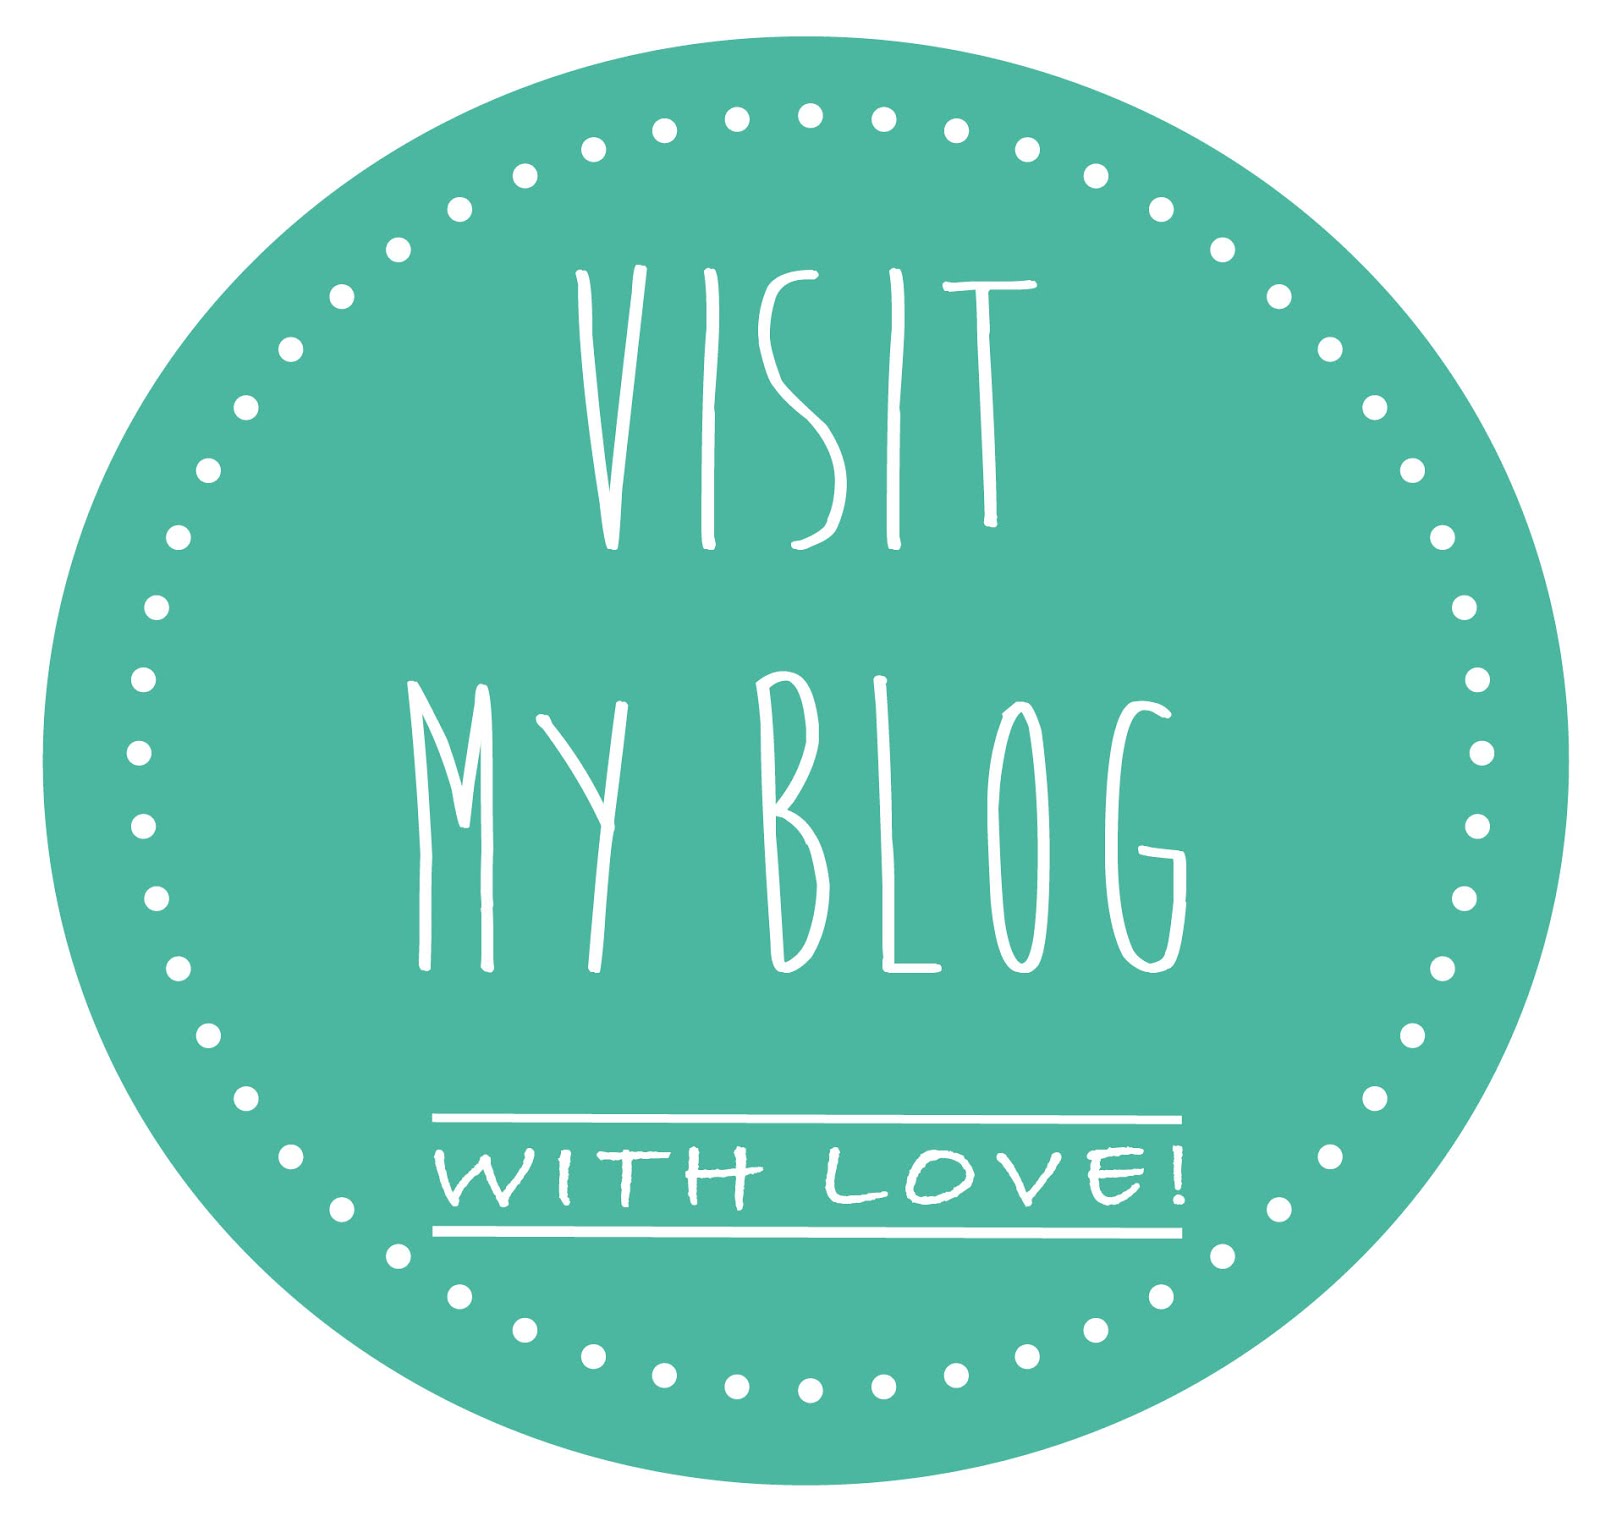 VISIT MY ANOTHER BLOG!